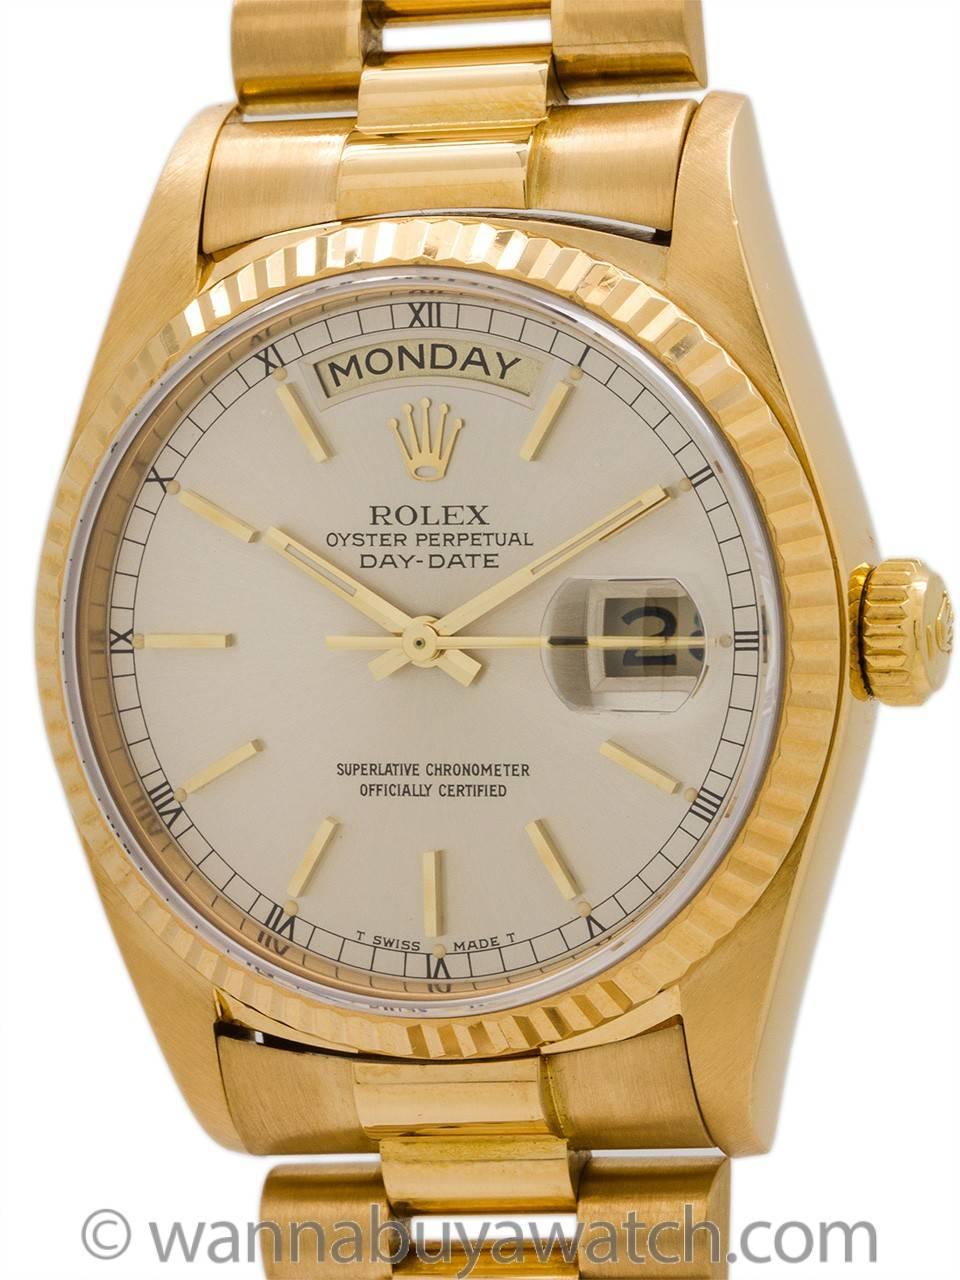 Rolex 18K YG Day Date President ref 18038 circa 1980’s. 36mm diameter full size man’s model with sapphire crystal and fluted bezel. Original champagne dial with applied gold indexes and gold baton hands. Powered by calibre 3155 movement with quick